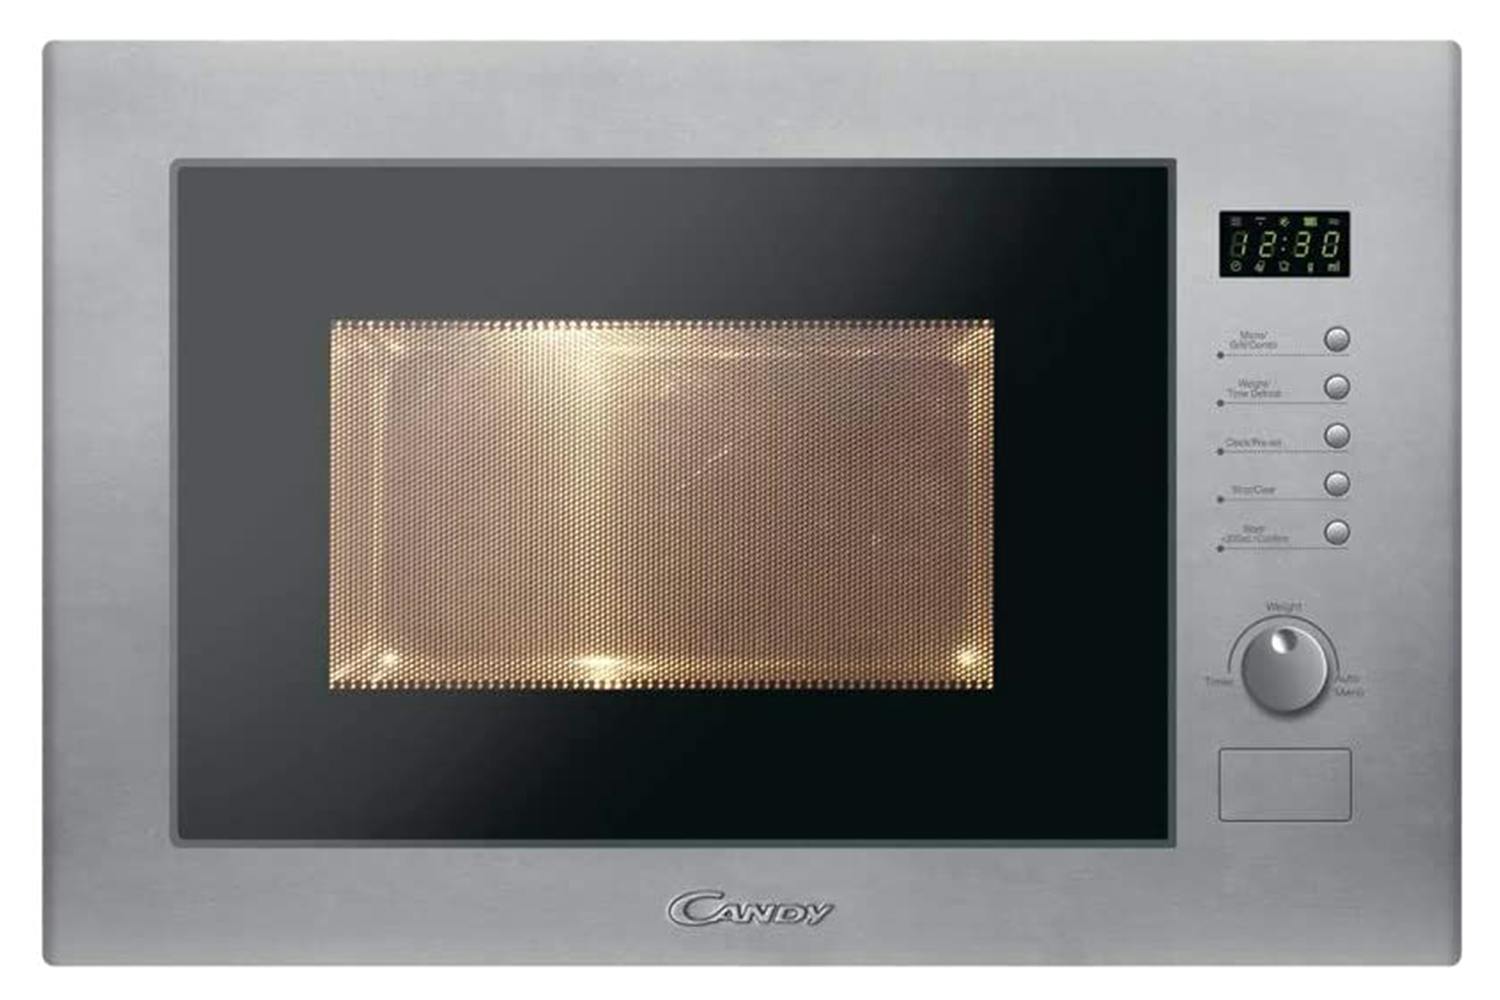 Candy 25L 900W Built-in Microwave | MIC25GDFX-80 | Stainless Steel